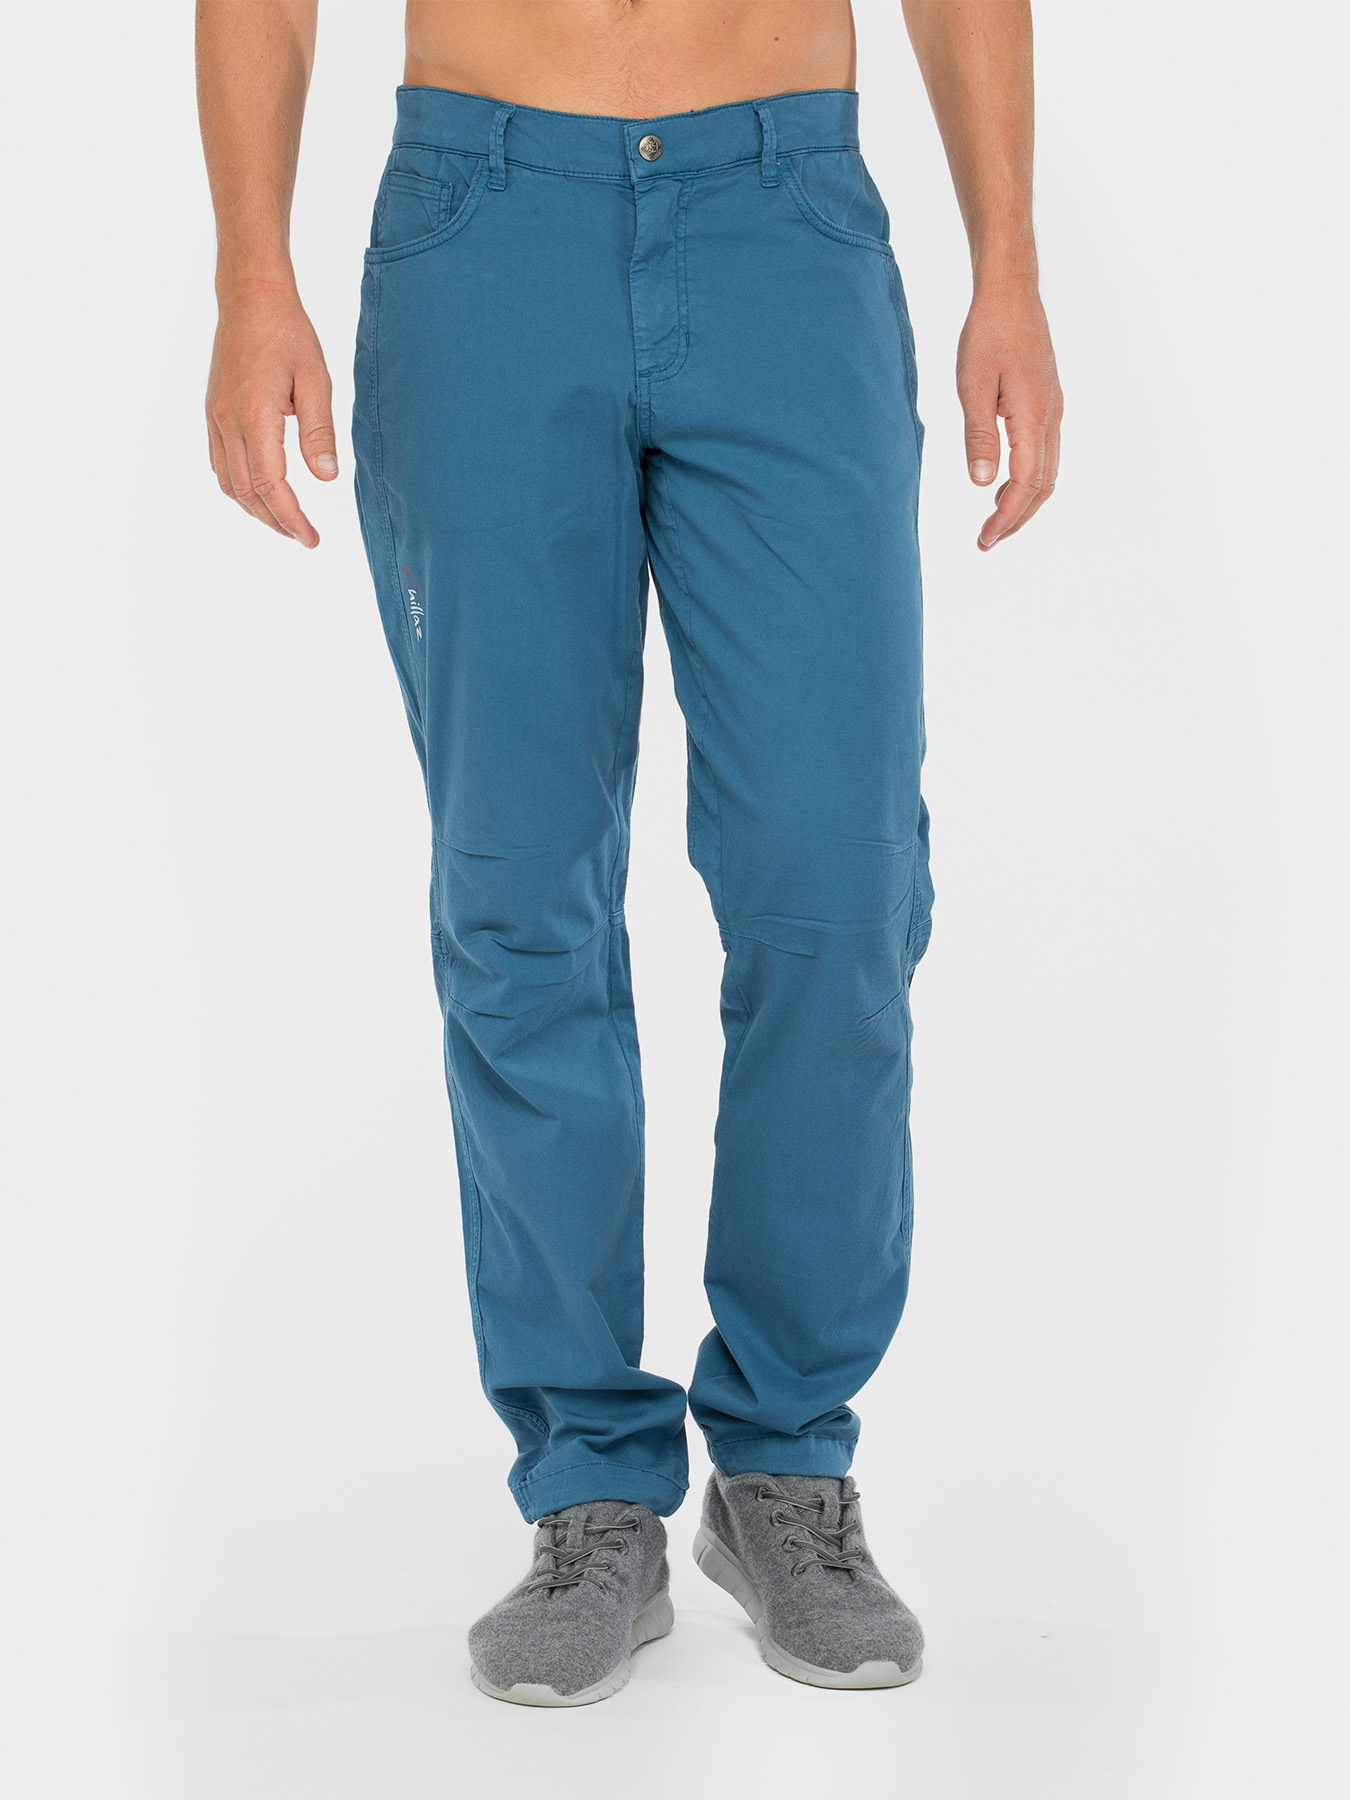 Cargo pants for hiking, Magic jeans for shopping, or casual pants